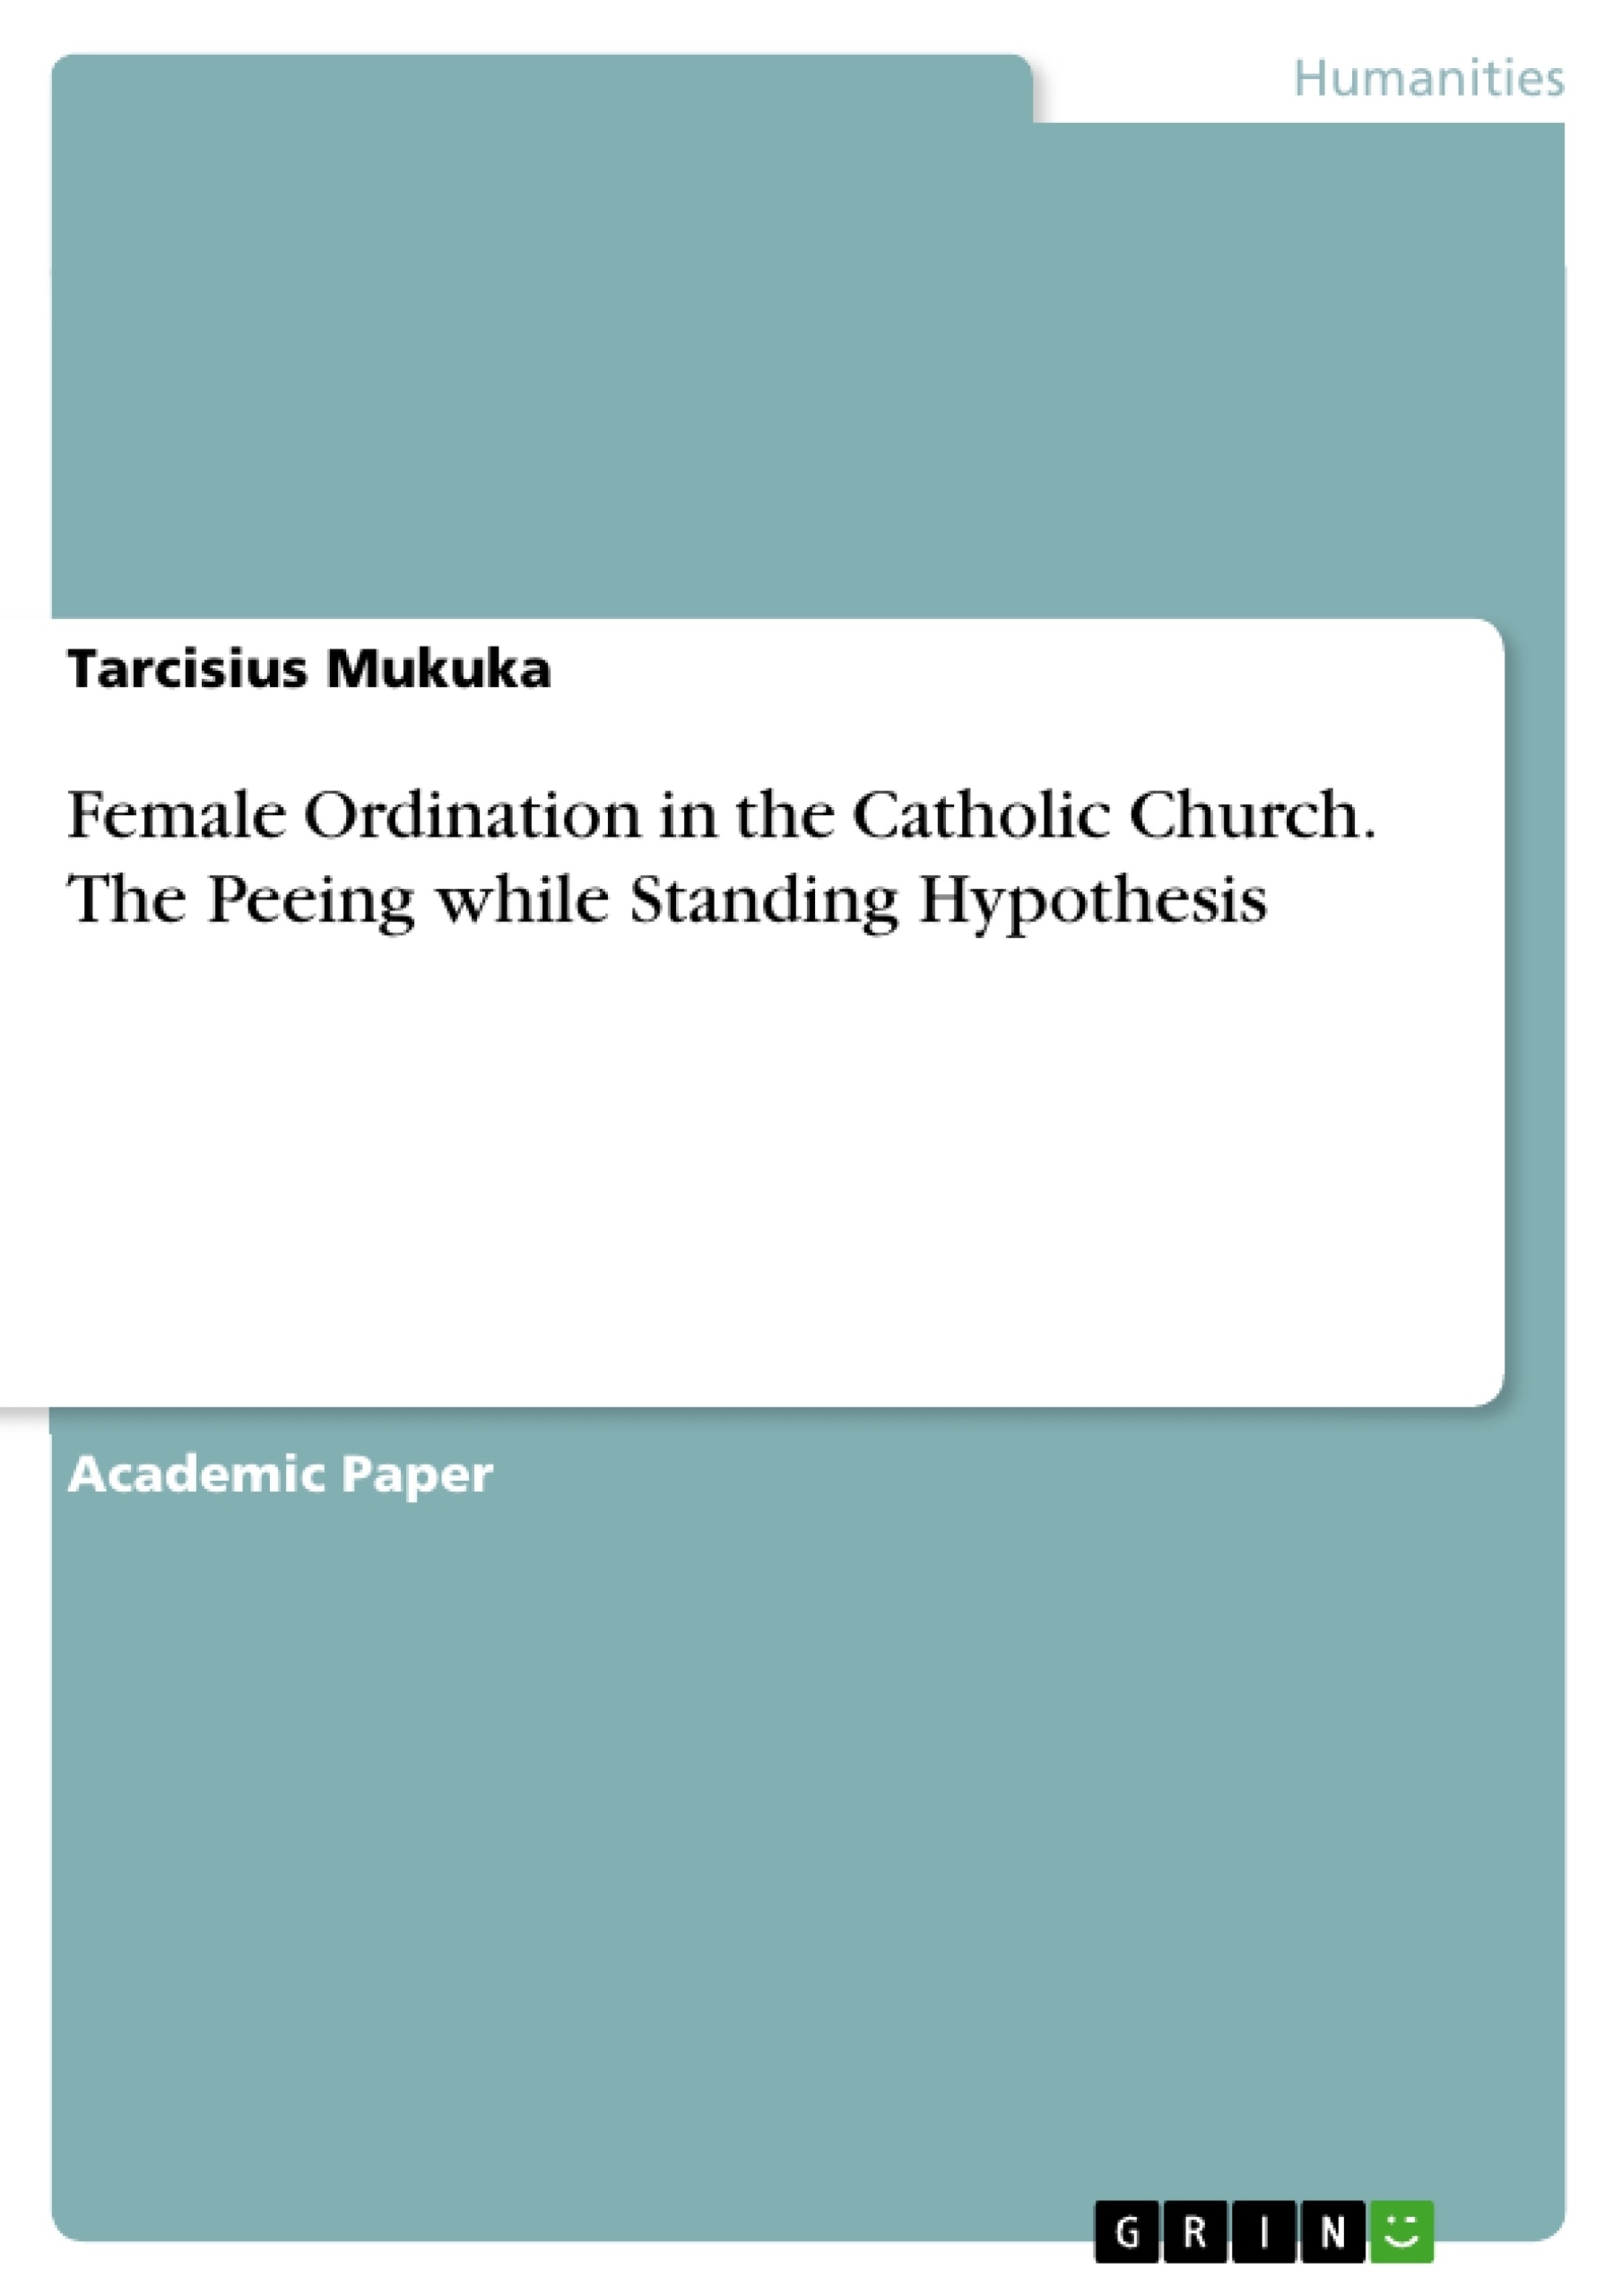 Title: Female Ordination in the Catholic Church. The Peeing while Standing Hypothesis